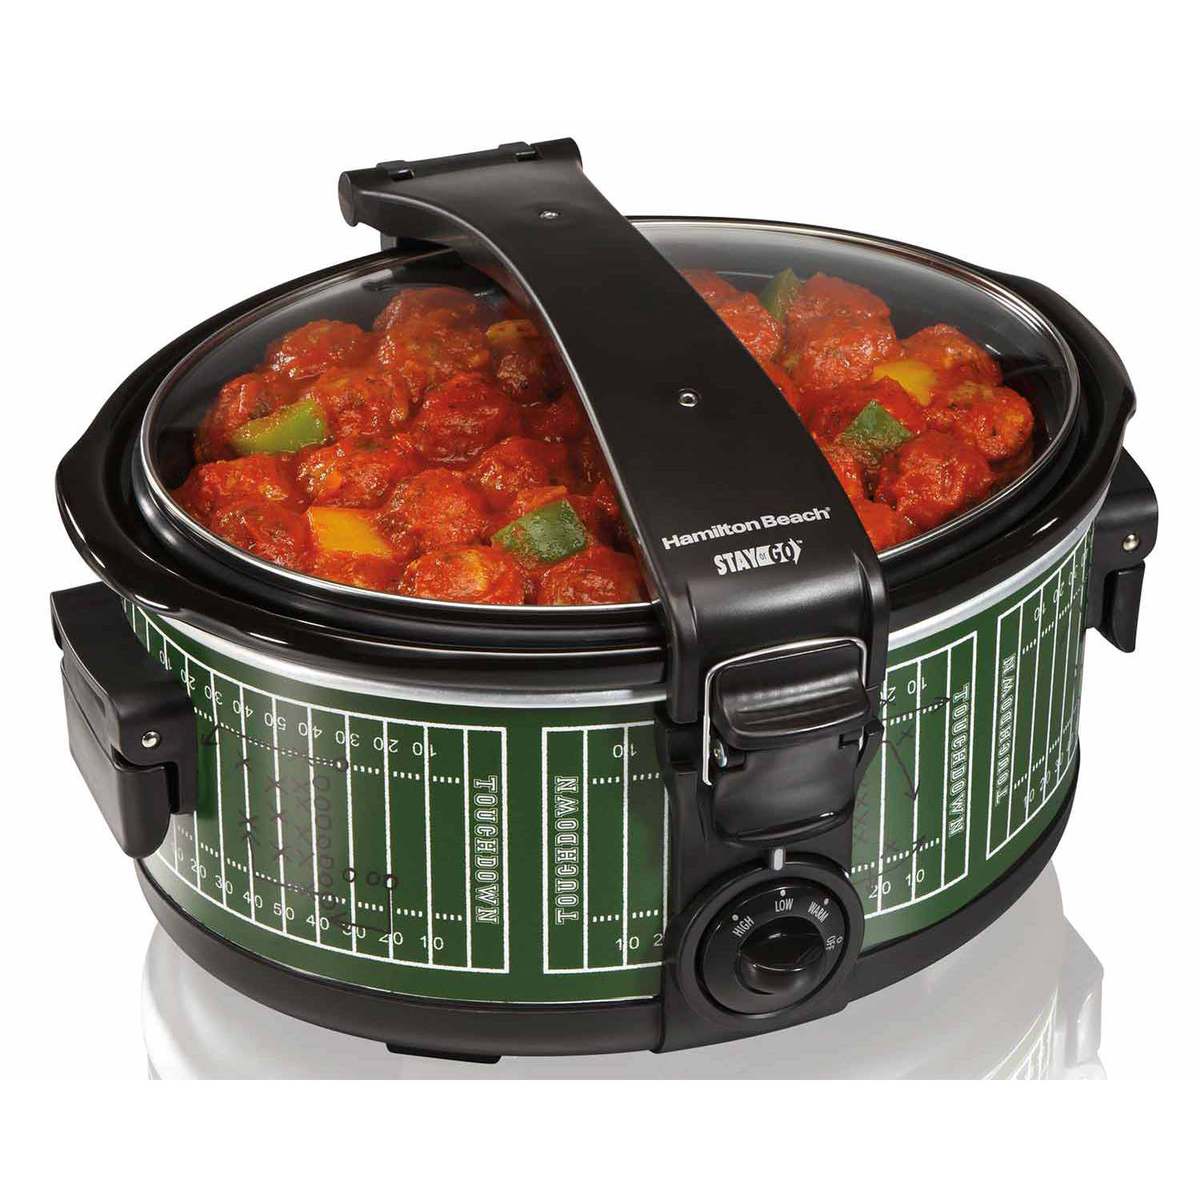 Stay or Go® 6 Quart Portable Slow Cooker (33462)